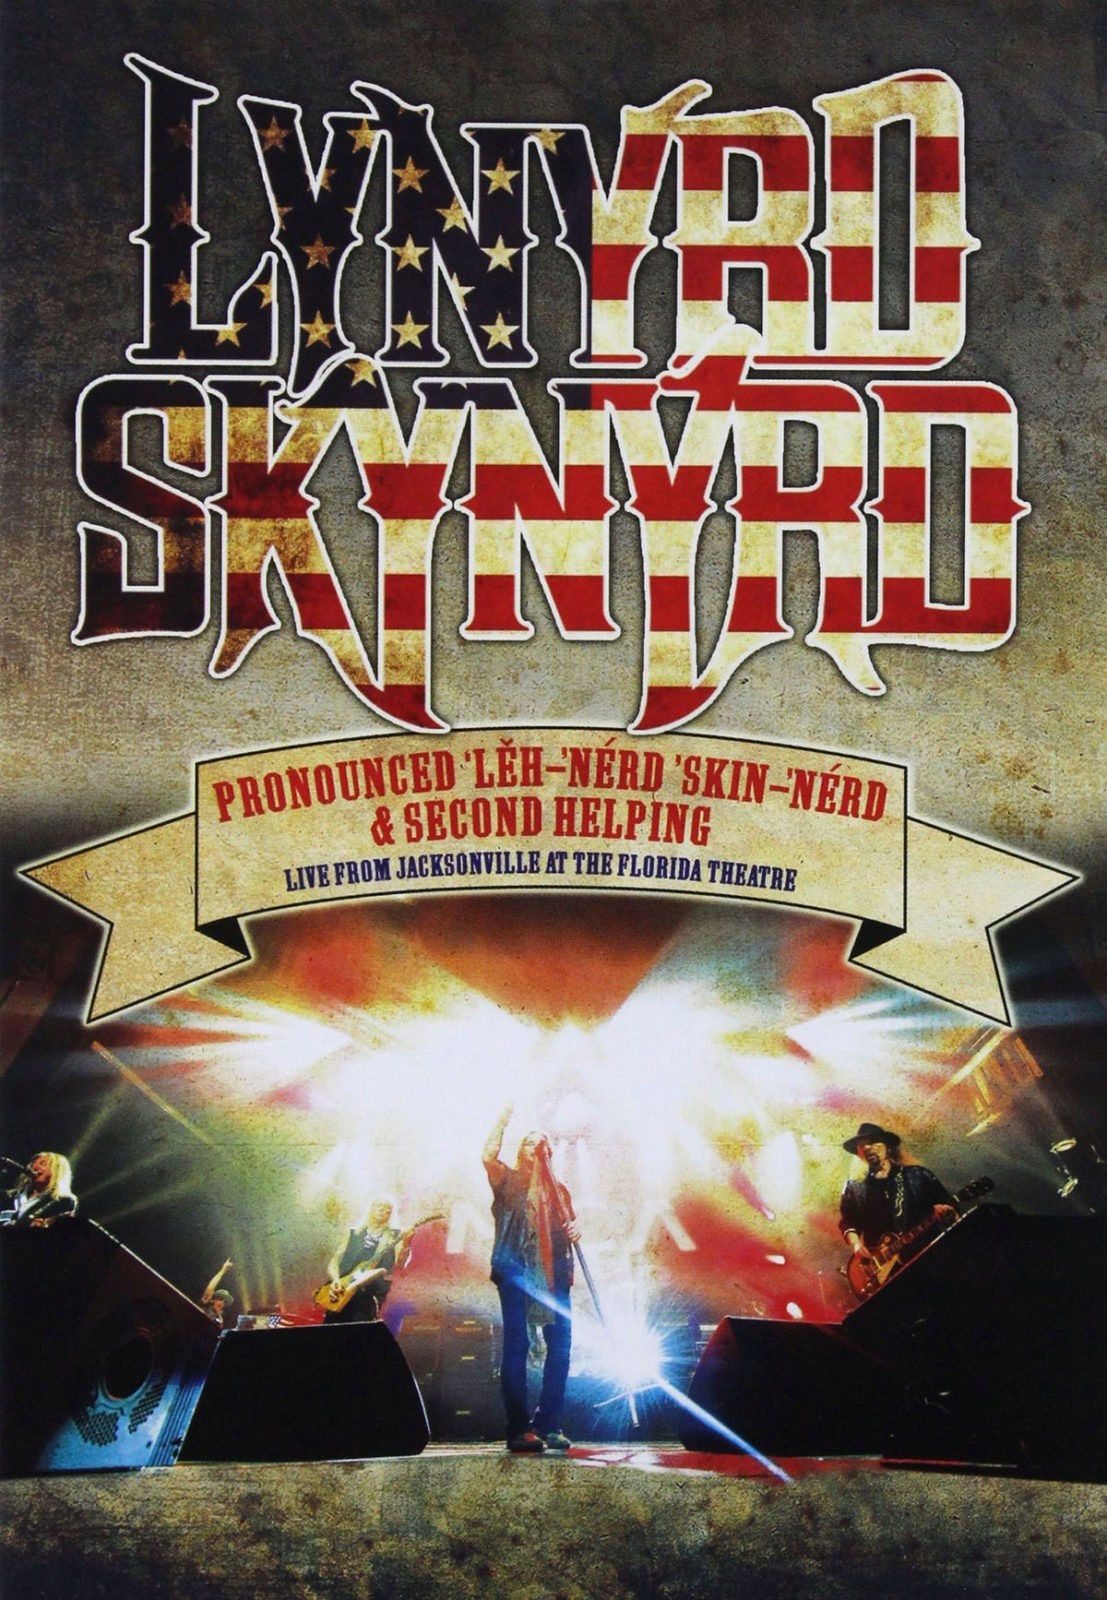 DVD cover of the band